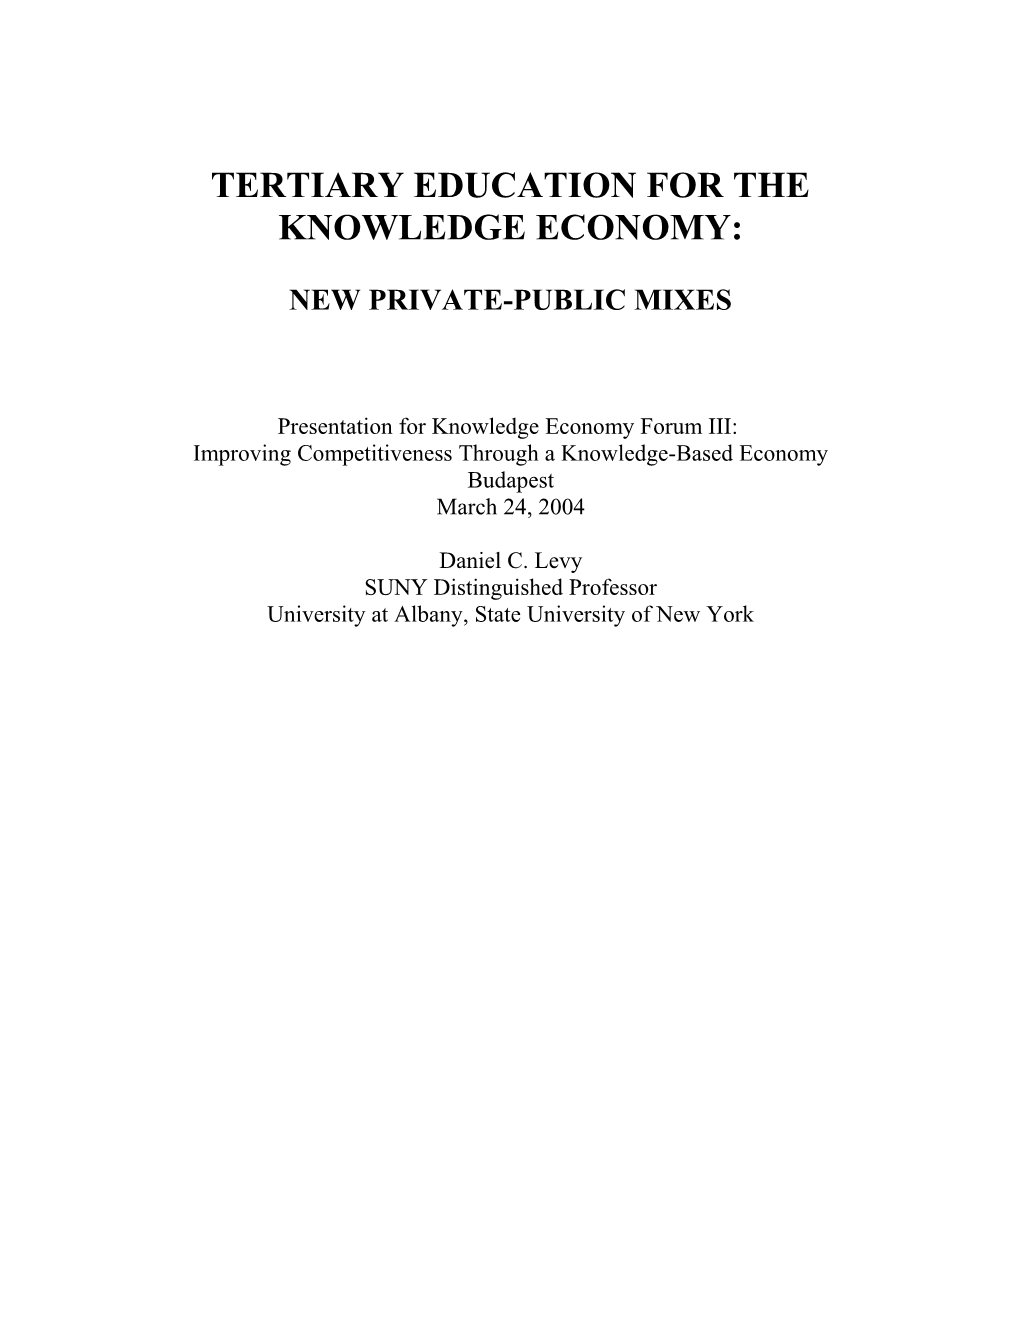 Tertiary Education for the Knowledge Economy